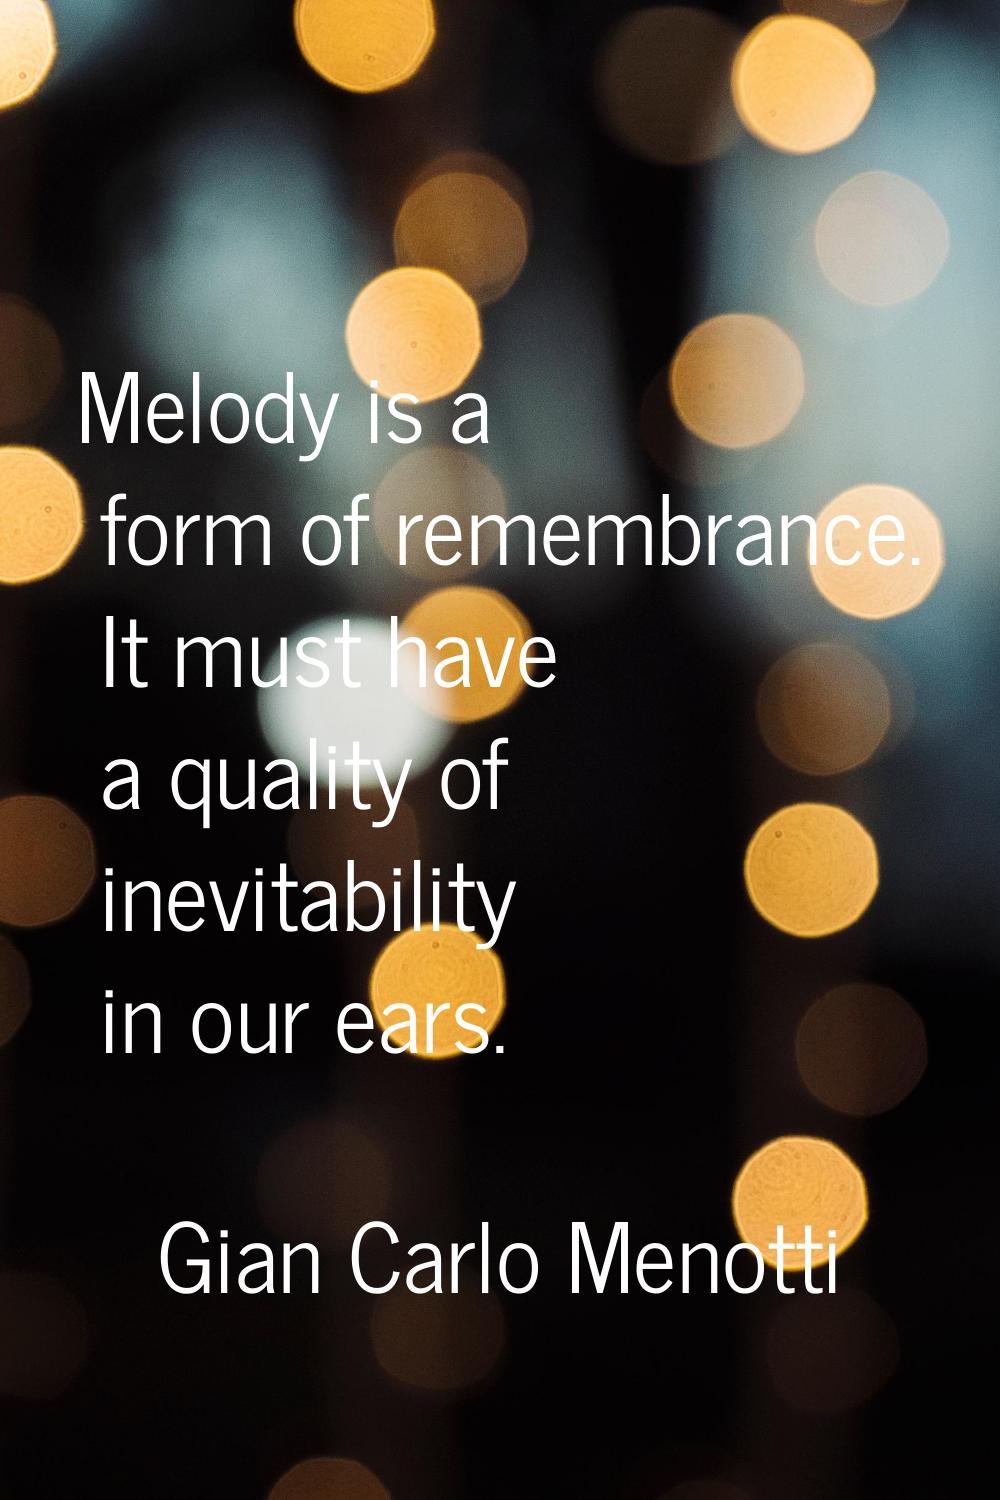 Melody is a form of remembrance. It must have a quality of inevitability in our ears.